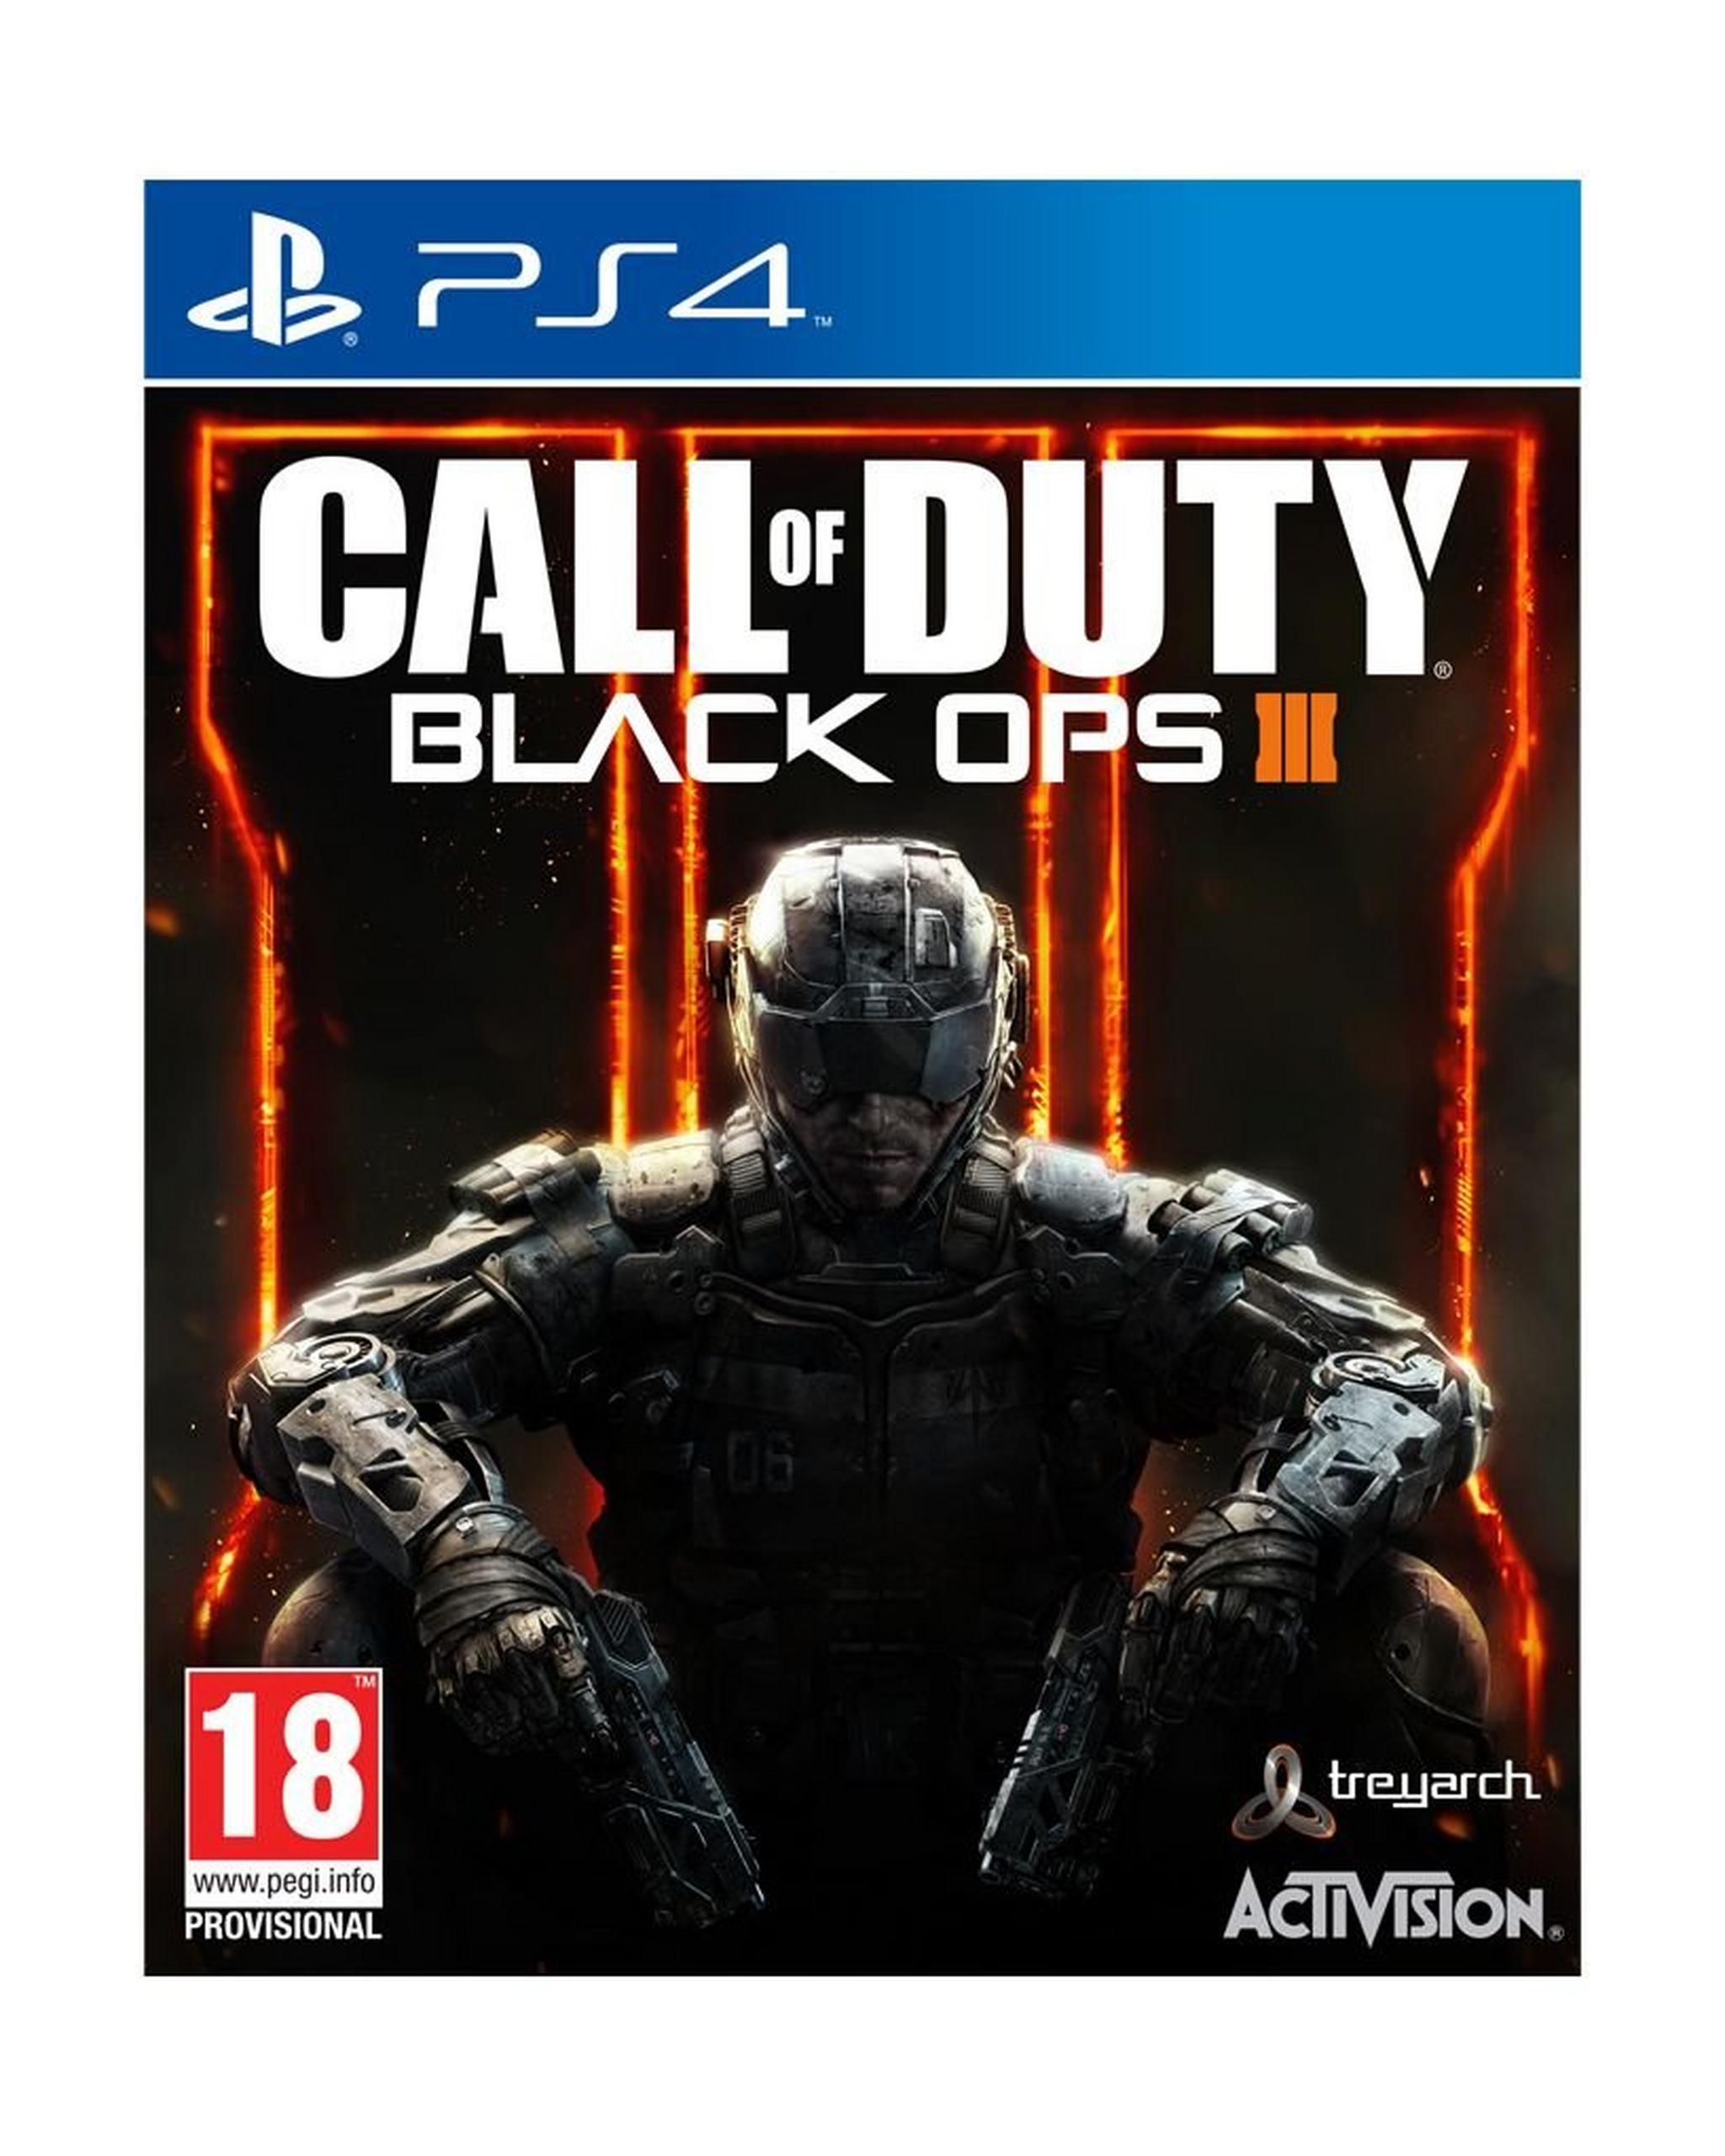 Call Of Duty: Black Ops III - PlayStation 4 Game